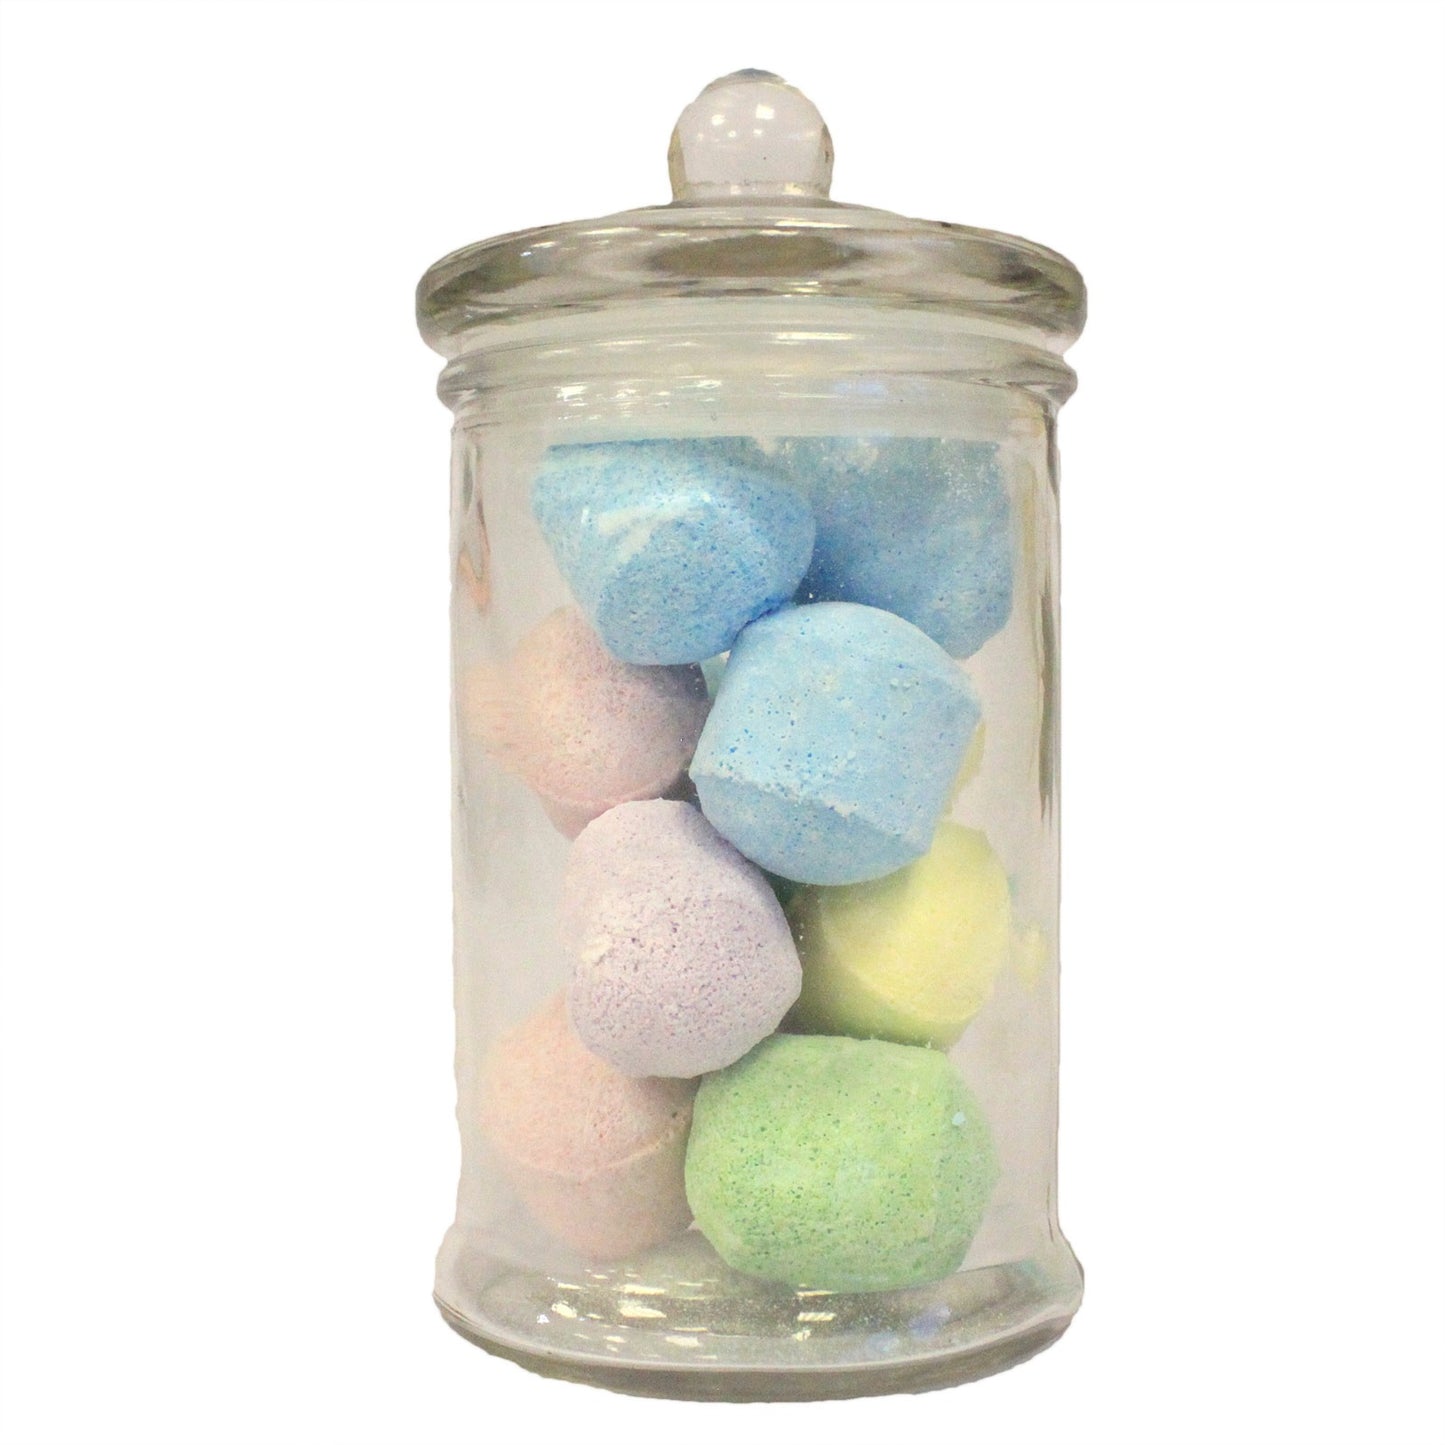 Candy Jars - Small Classic Clear